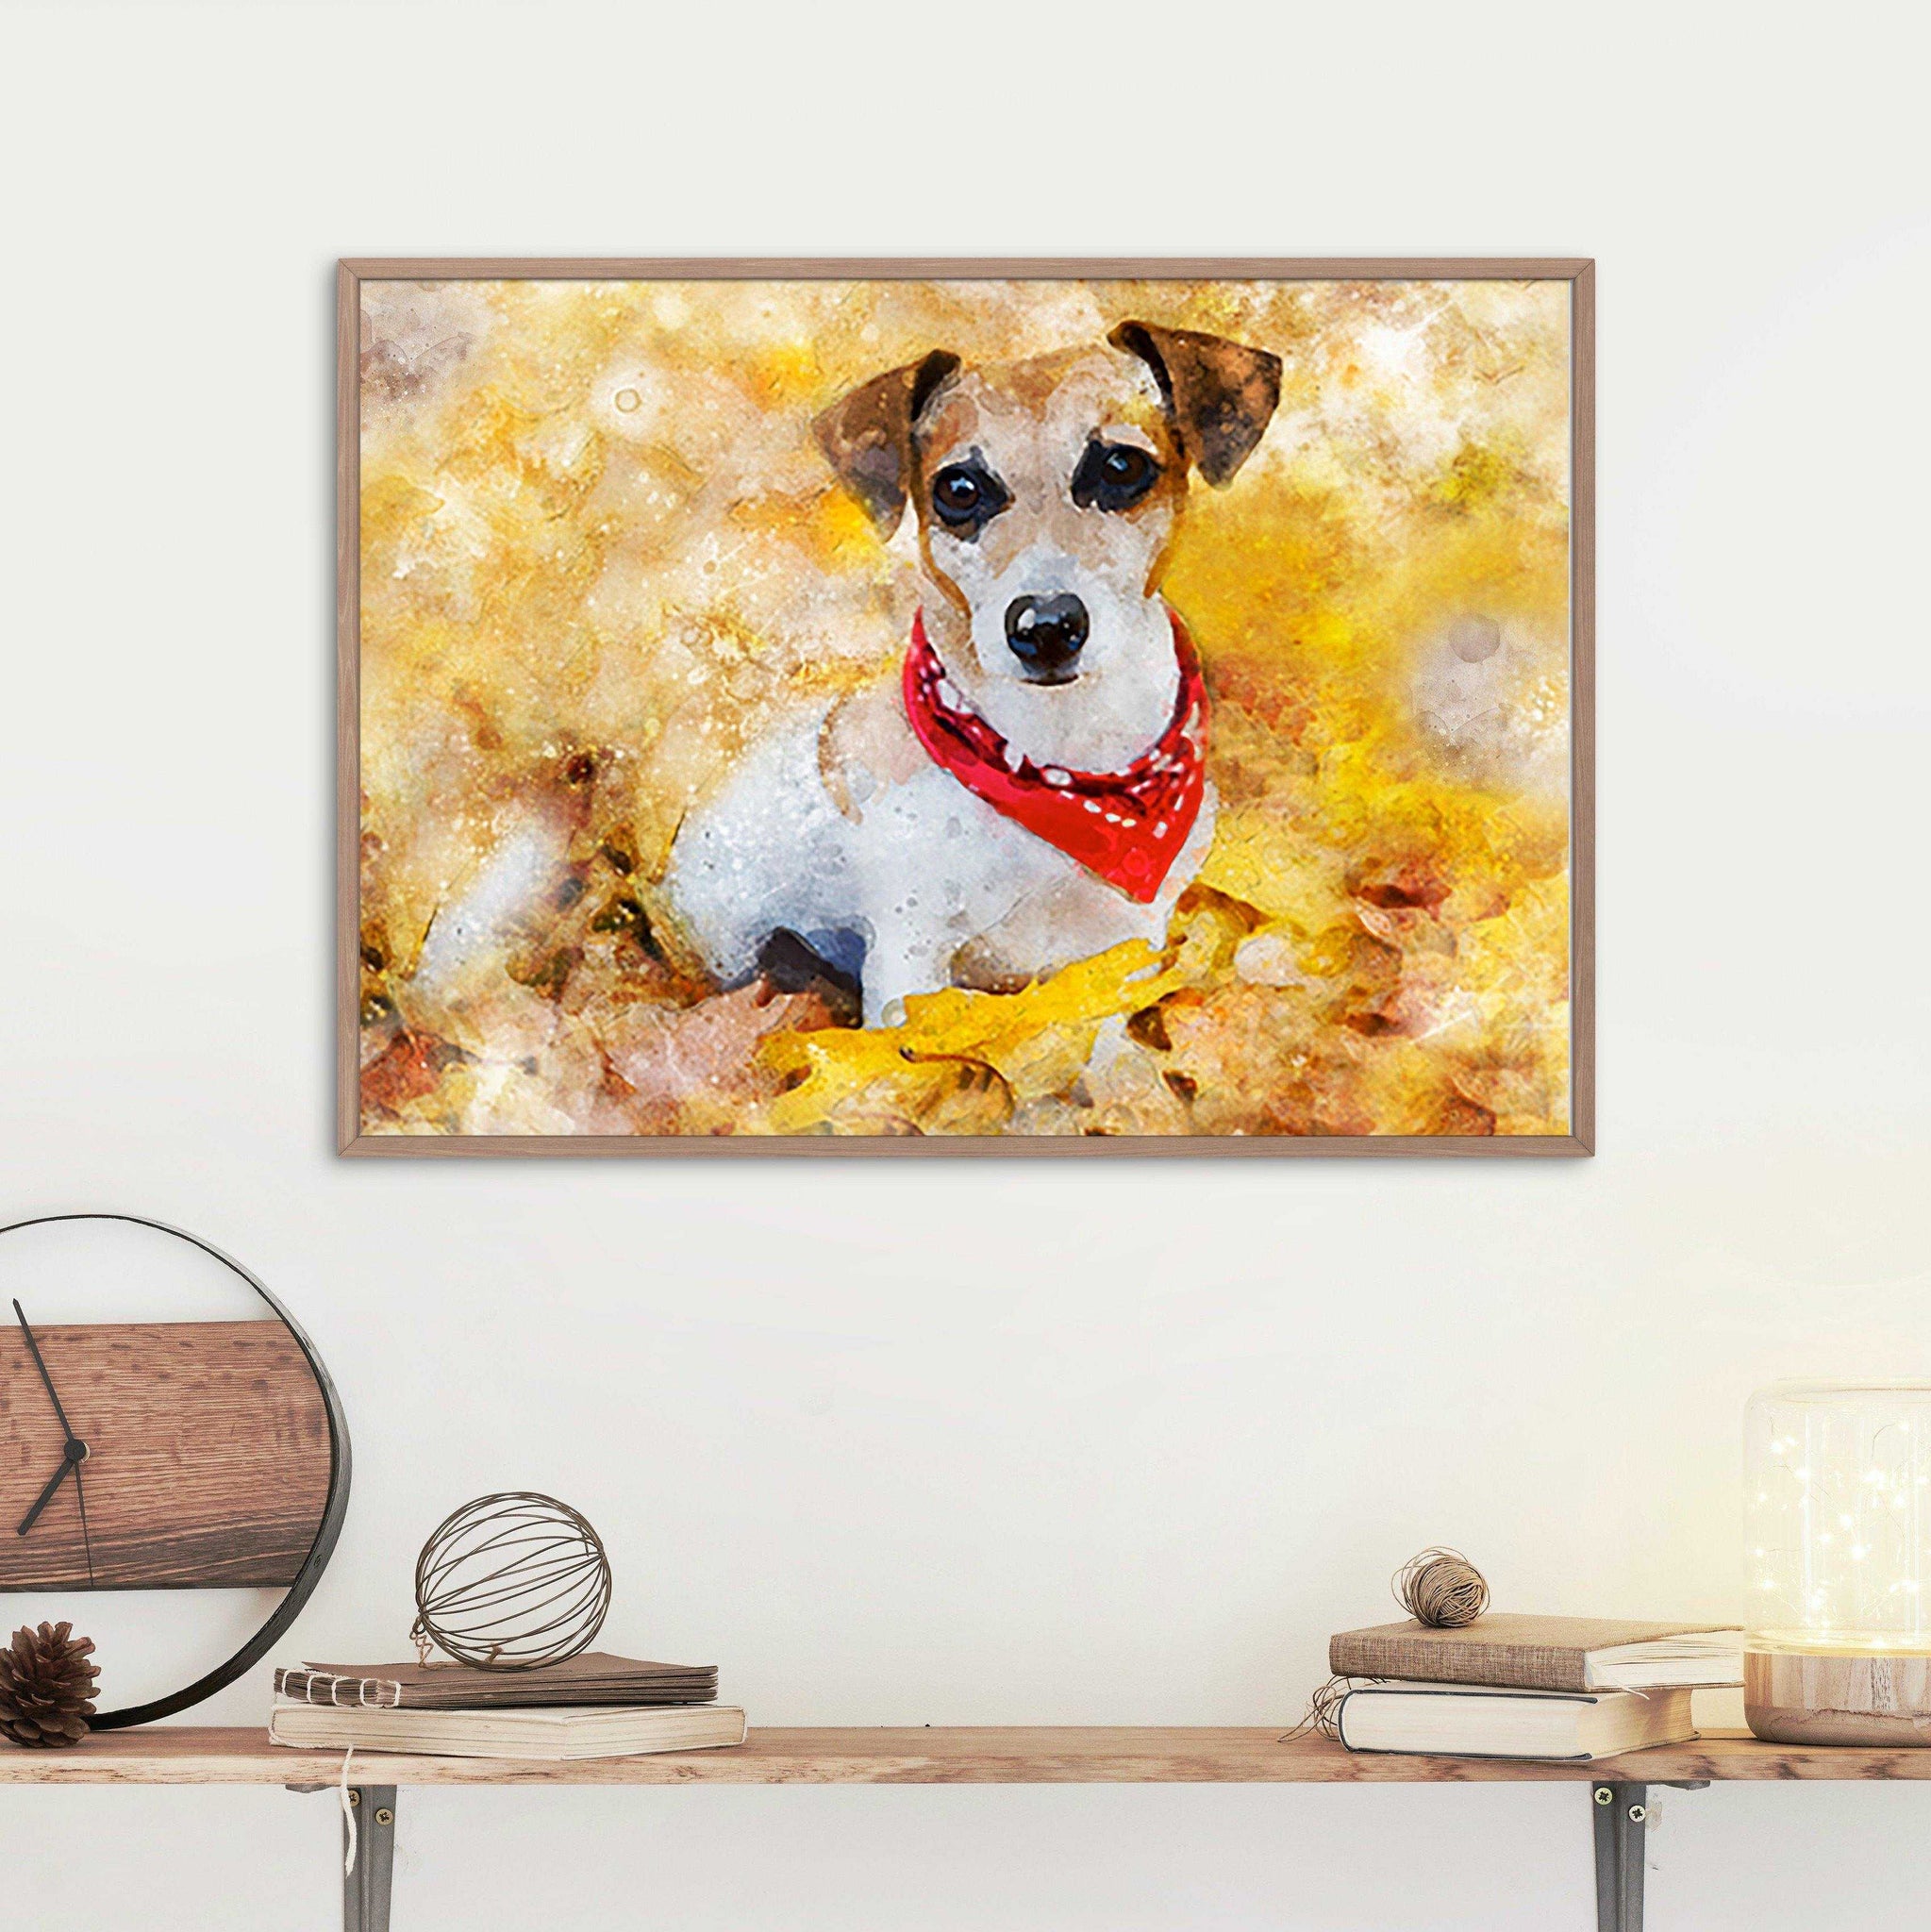 Custom Pet Paintings from Photo, Personalized Pet Portrait on Canvas - FromPicToArt